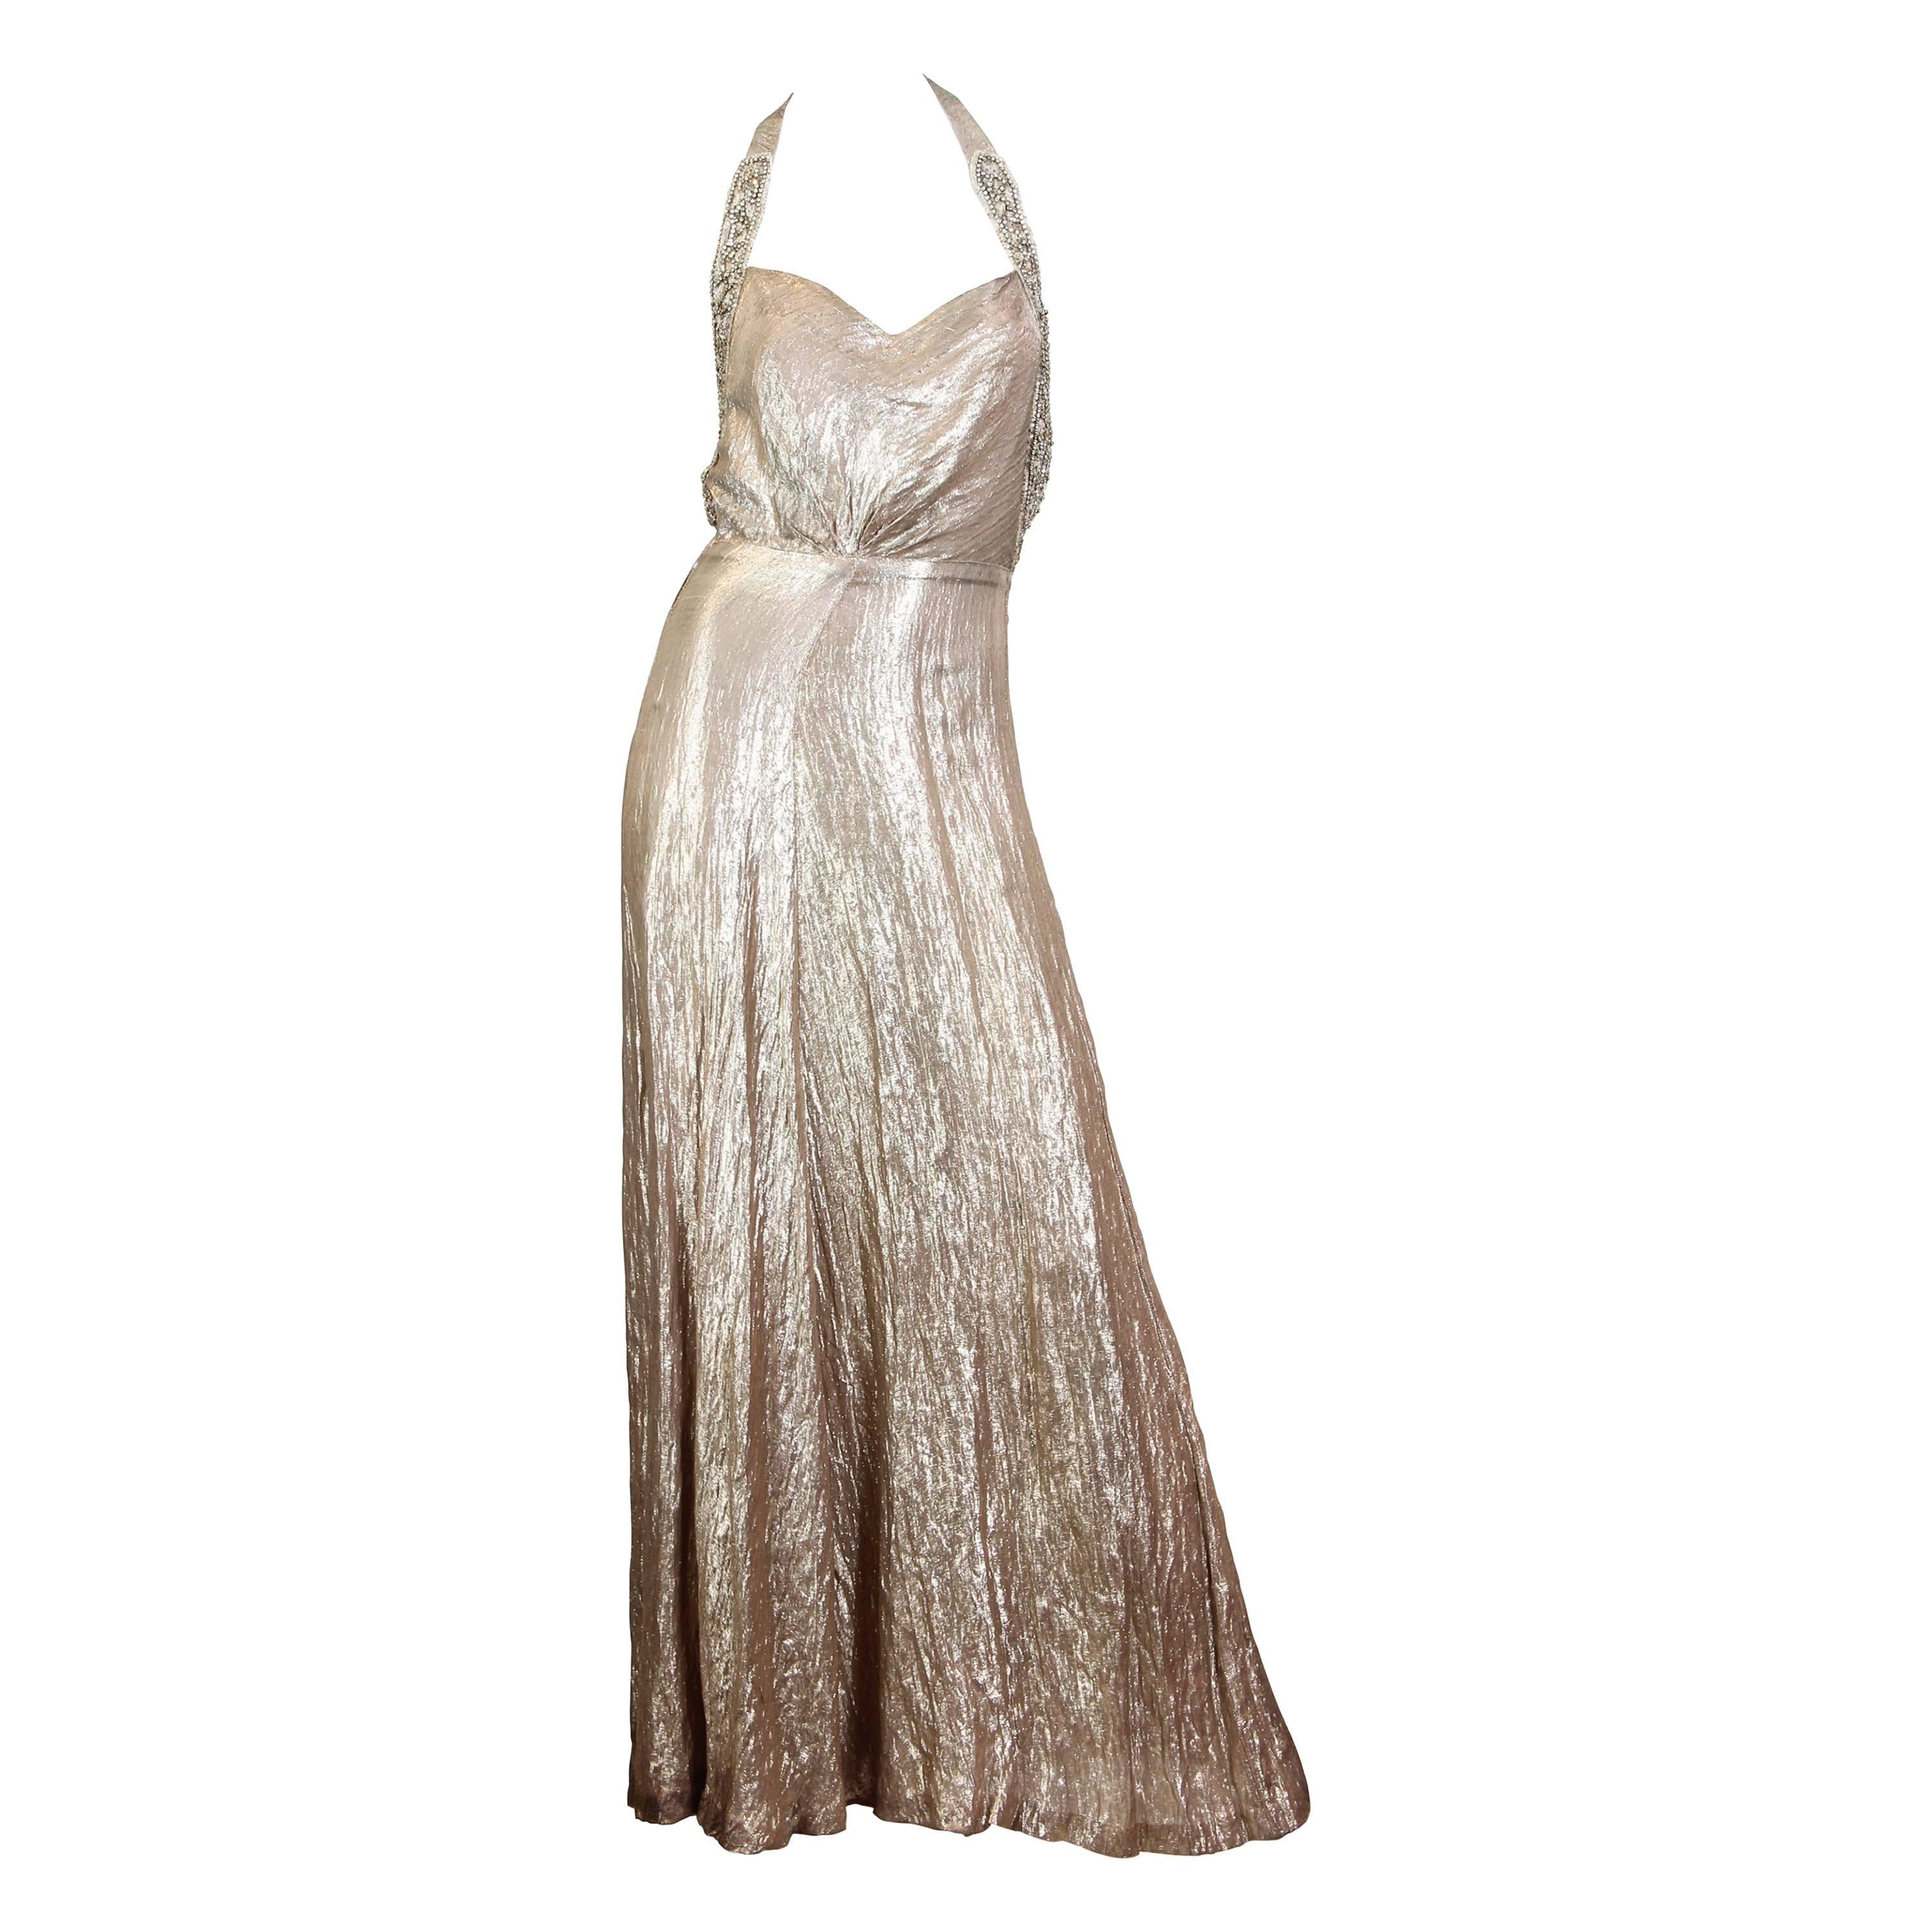 Spectacular Backless 1930s Silver Lamé Gown